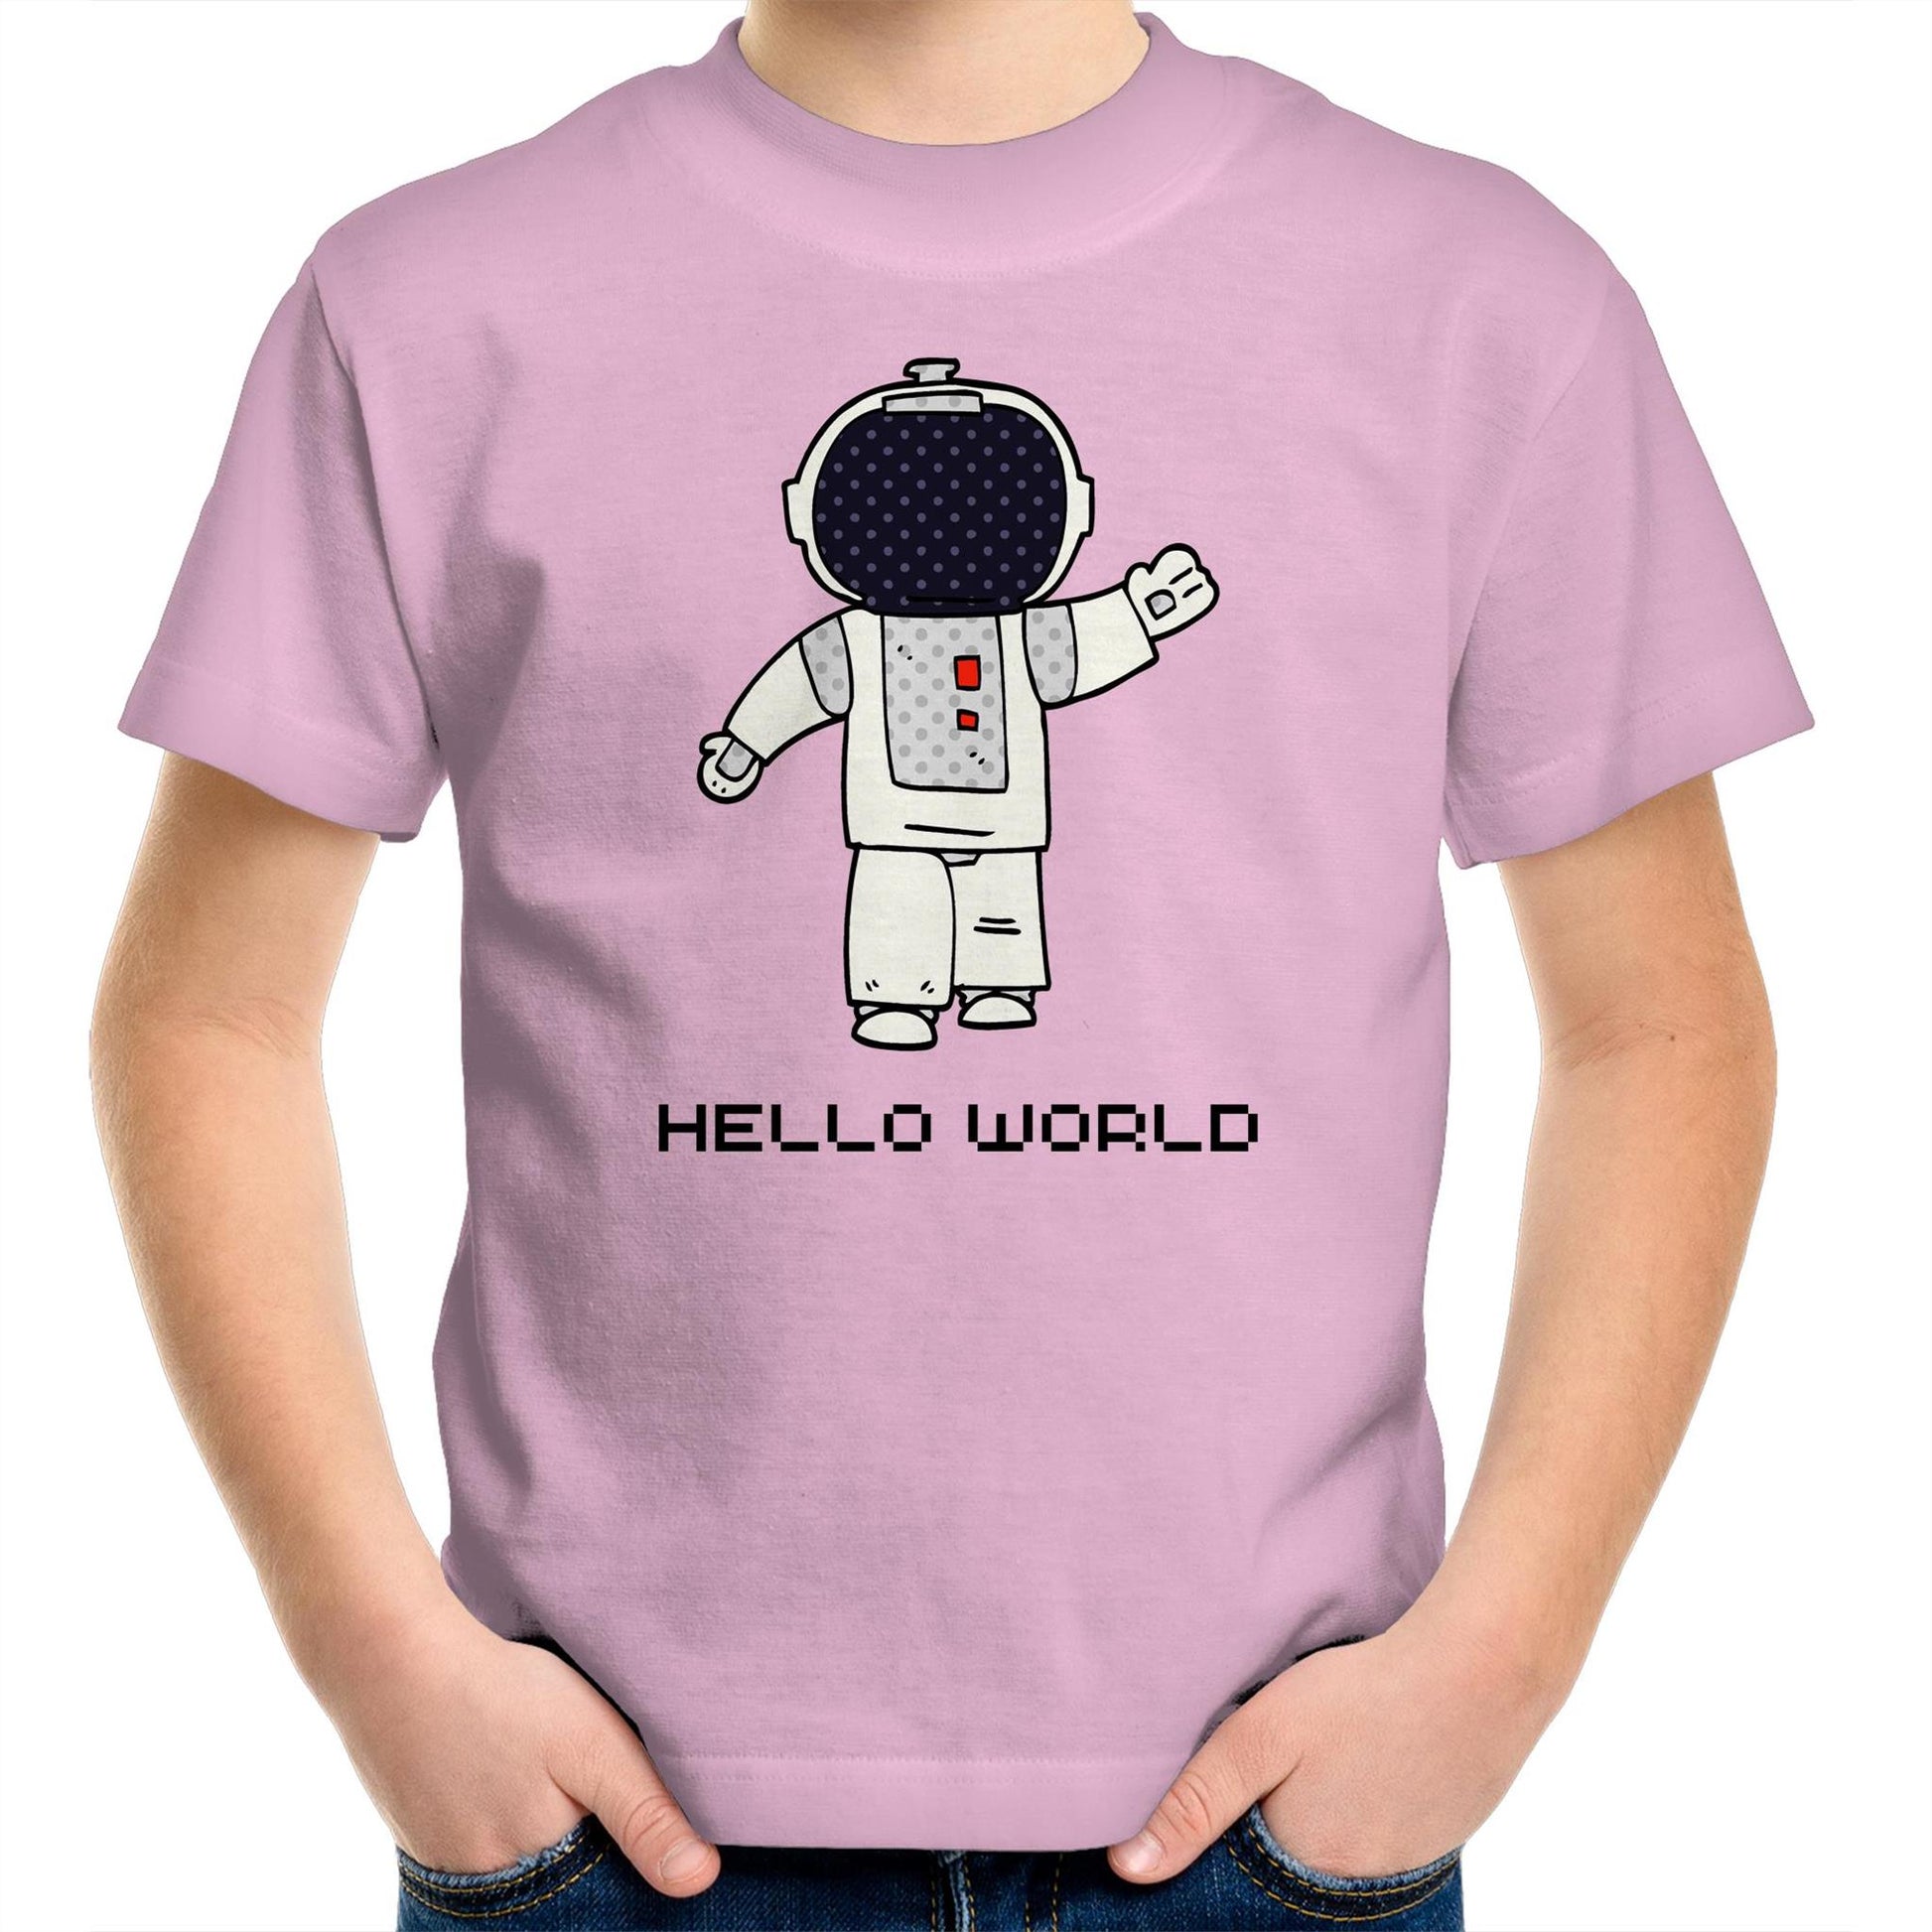 Astronaut, Hello World - Kids Youth T-Shirt Pink Kids Youth T-shirt Space